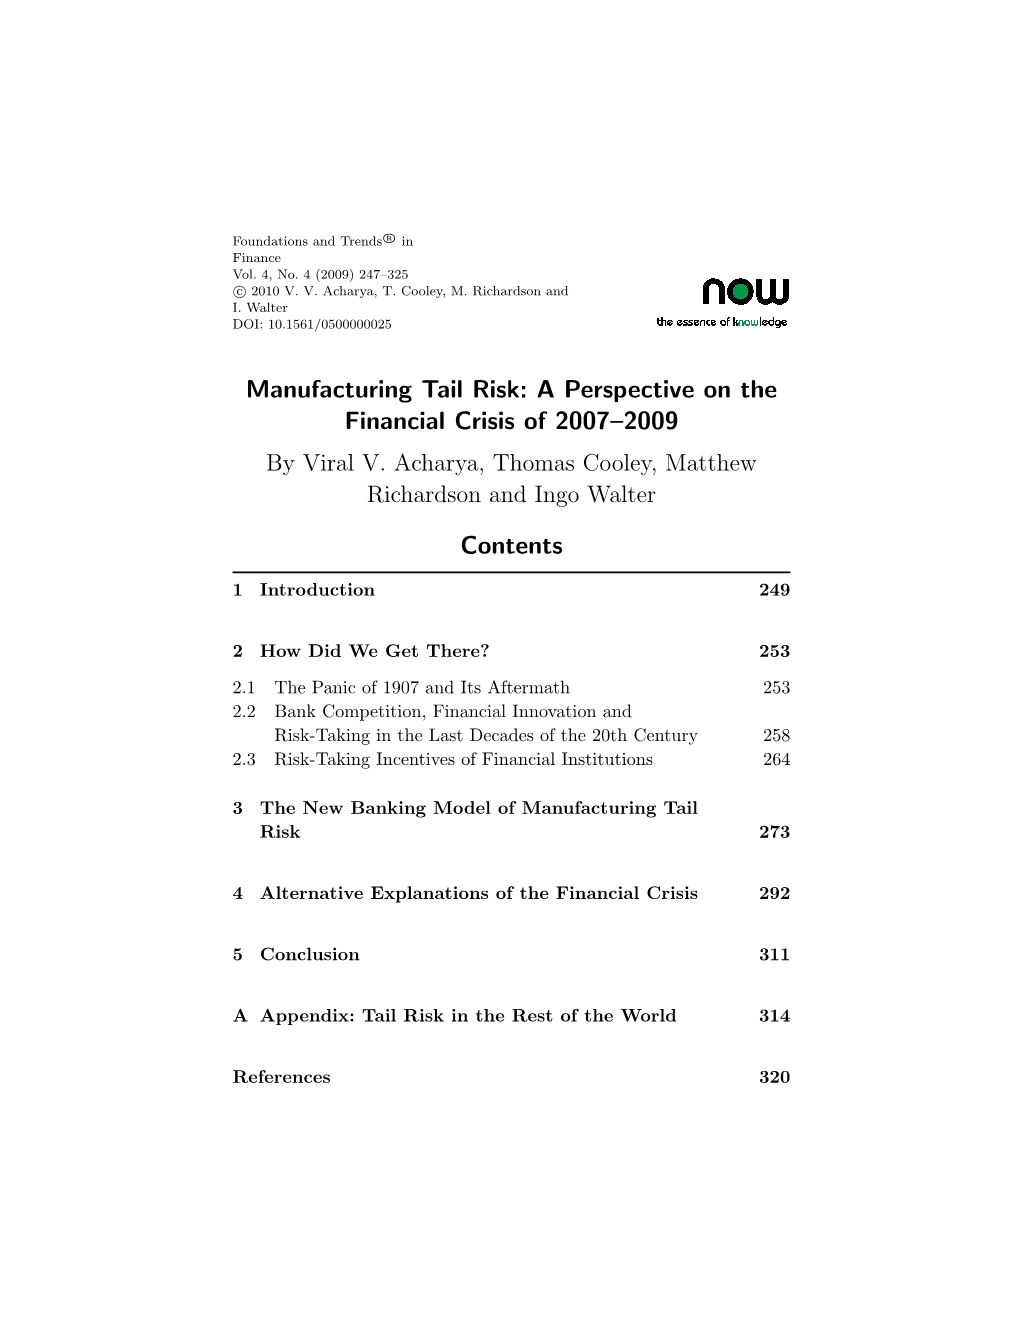 Manufacturing Tail Risk: a Perspective on the Financial Crisis of 2007–2009 by Viral V